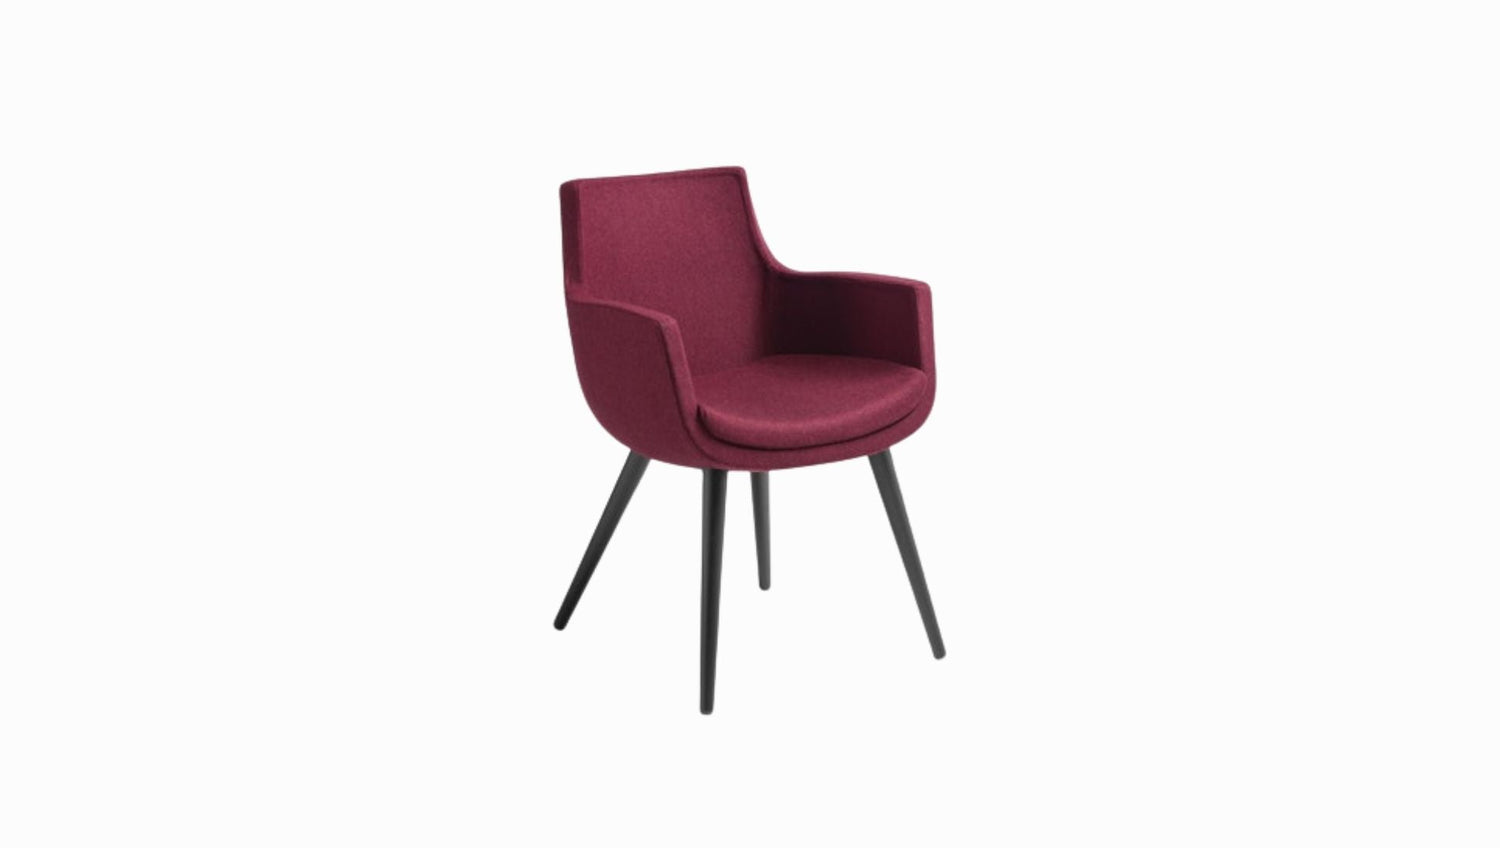 Soft Seating Timber Legs Ferne Chair